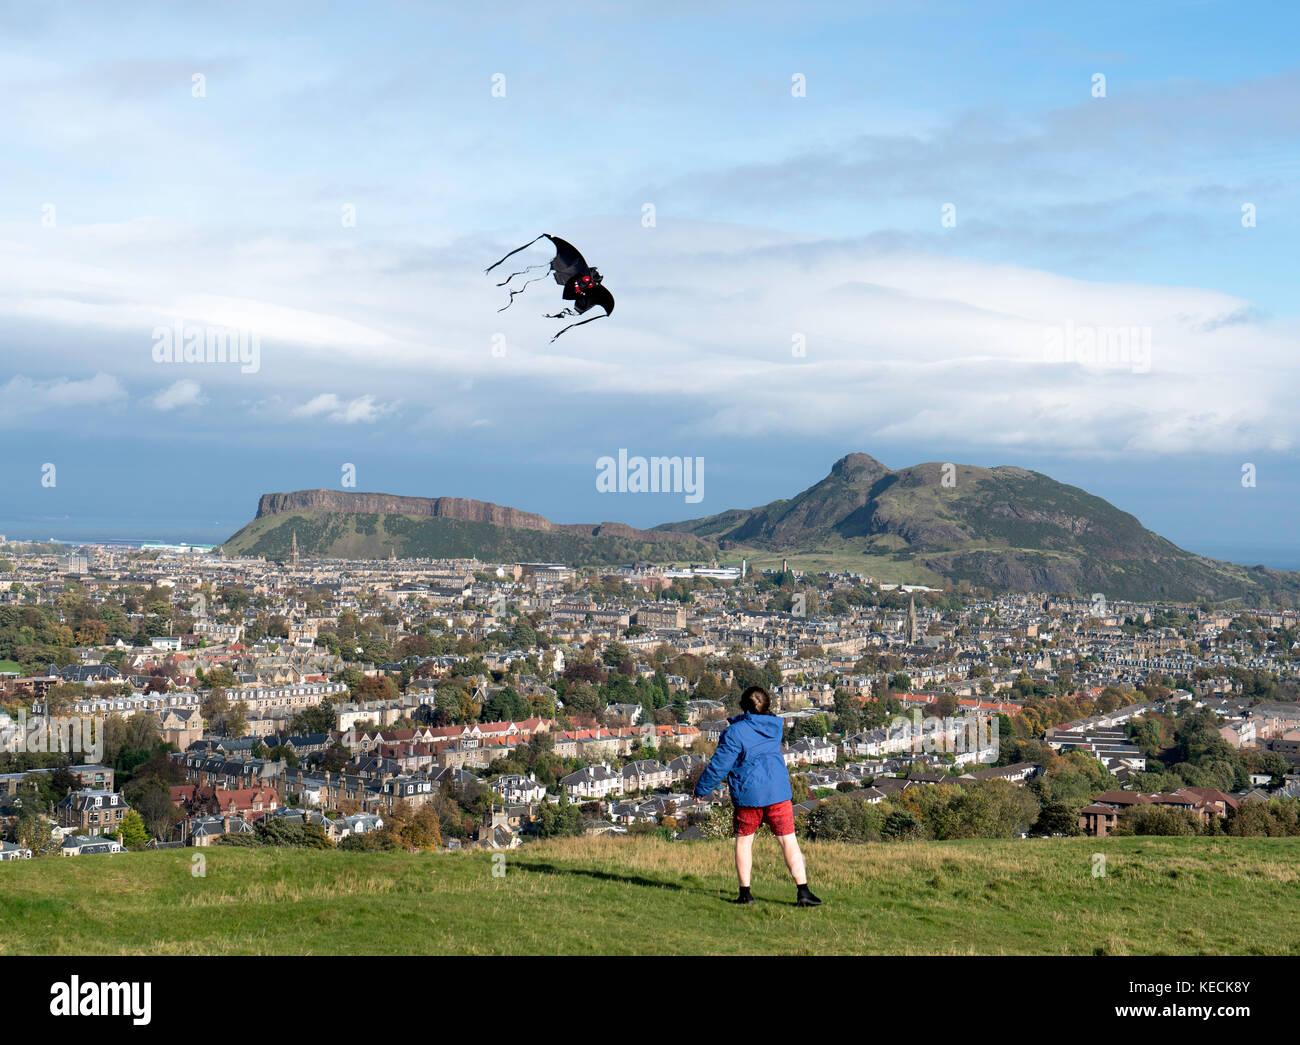 View of boy flying kite and Salisbury Crags and Arthur's Seat hill overlooking Edinburgh, Scotland, United Kingdom Stock Photo